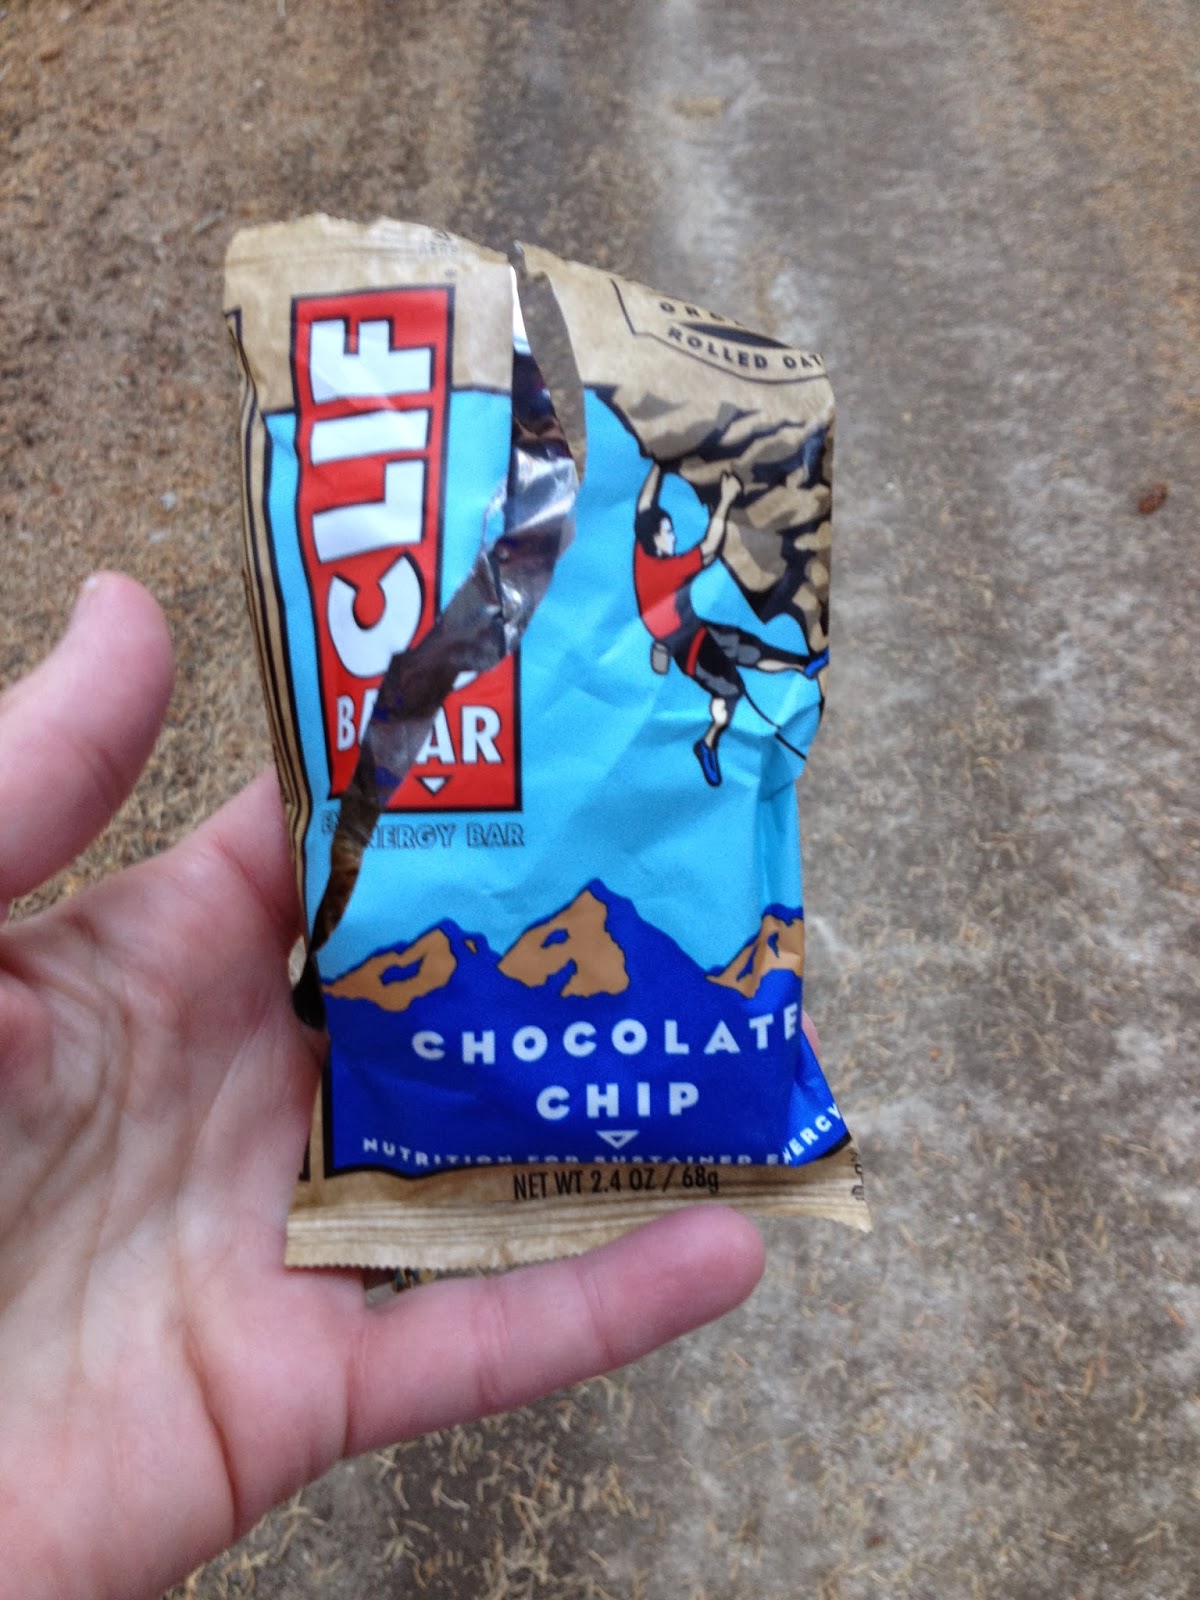 Good thing I had a Cliff Bar to keep me going!